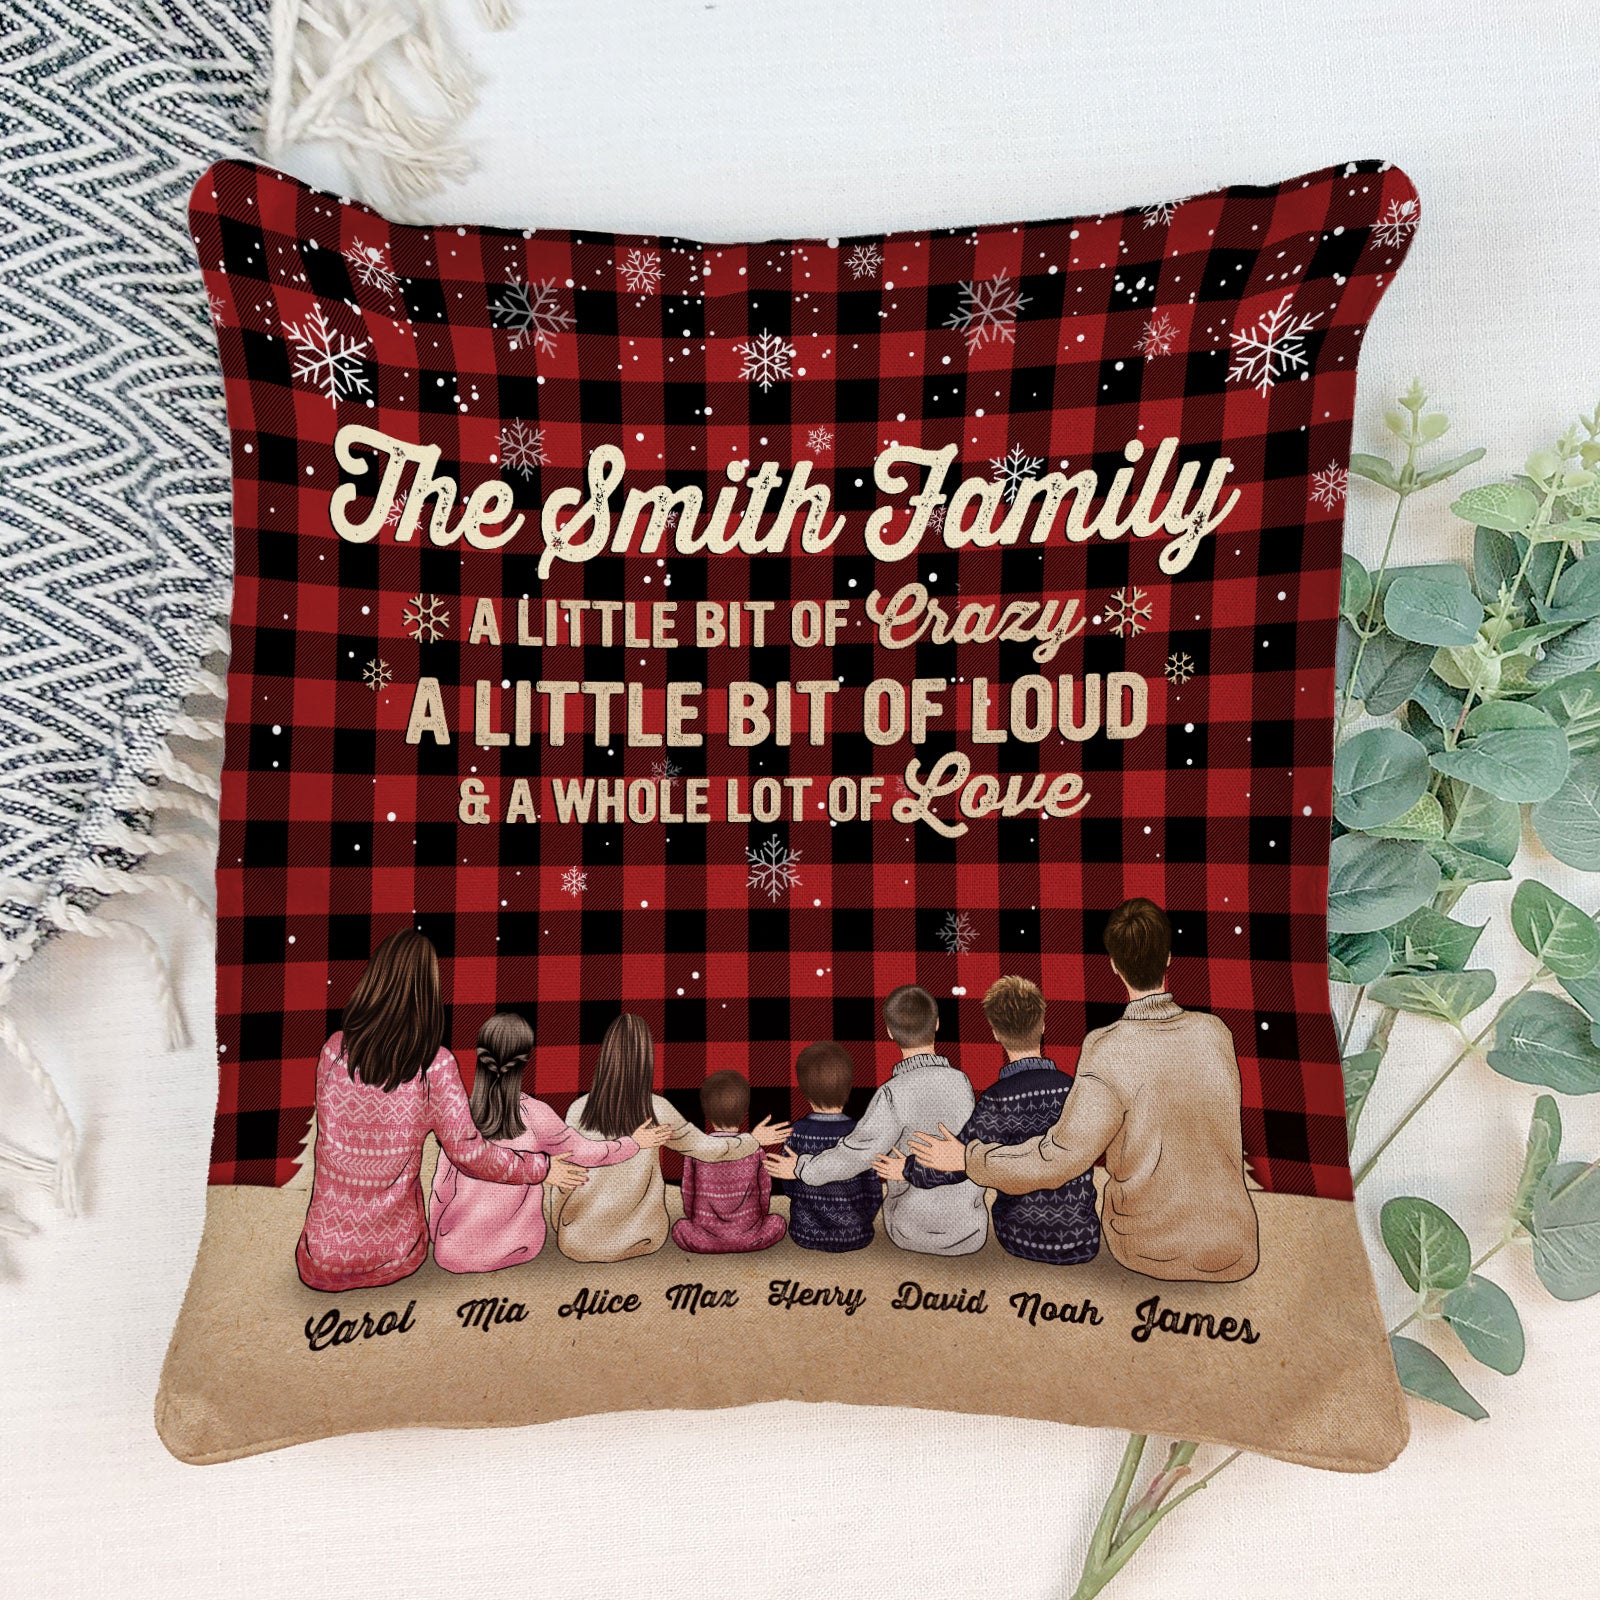 What We Love About Our Home - Personalized Pillow (Insert Included) - Christmas Gift For Family Members - Hugging Family